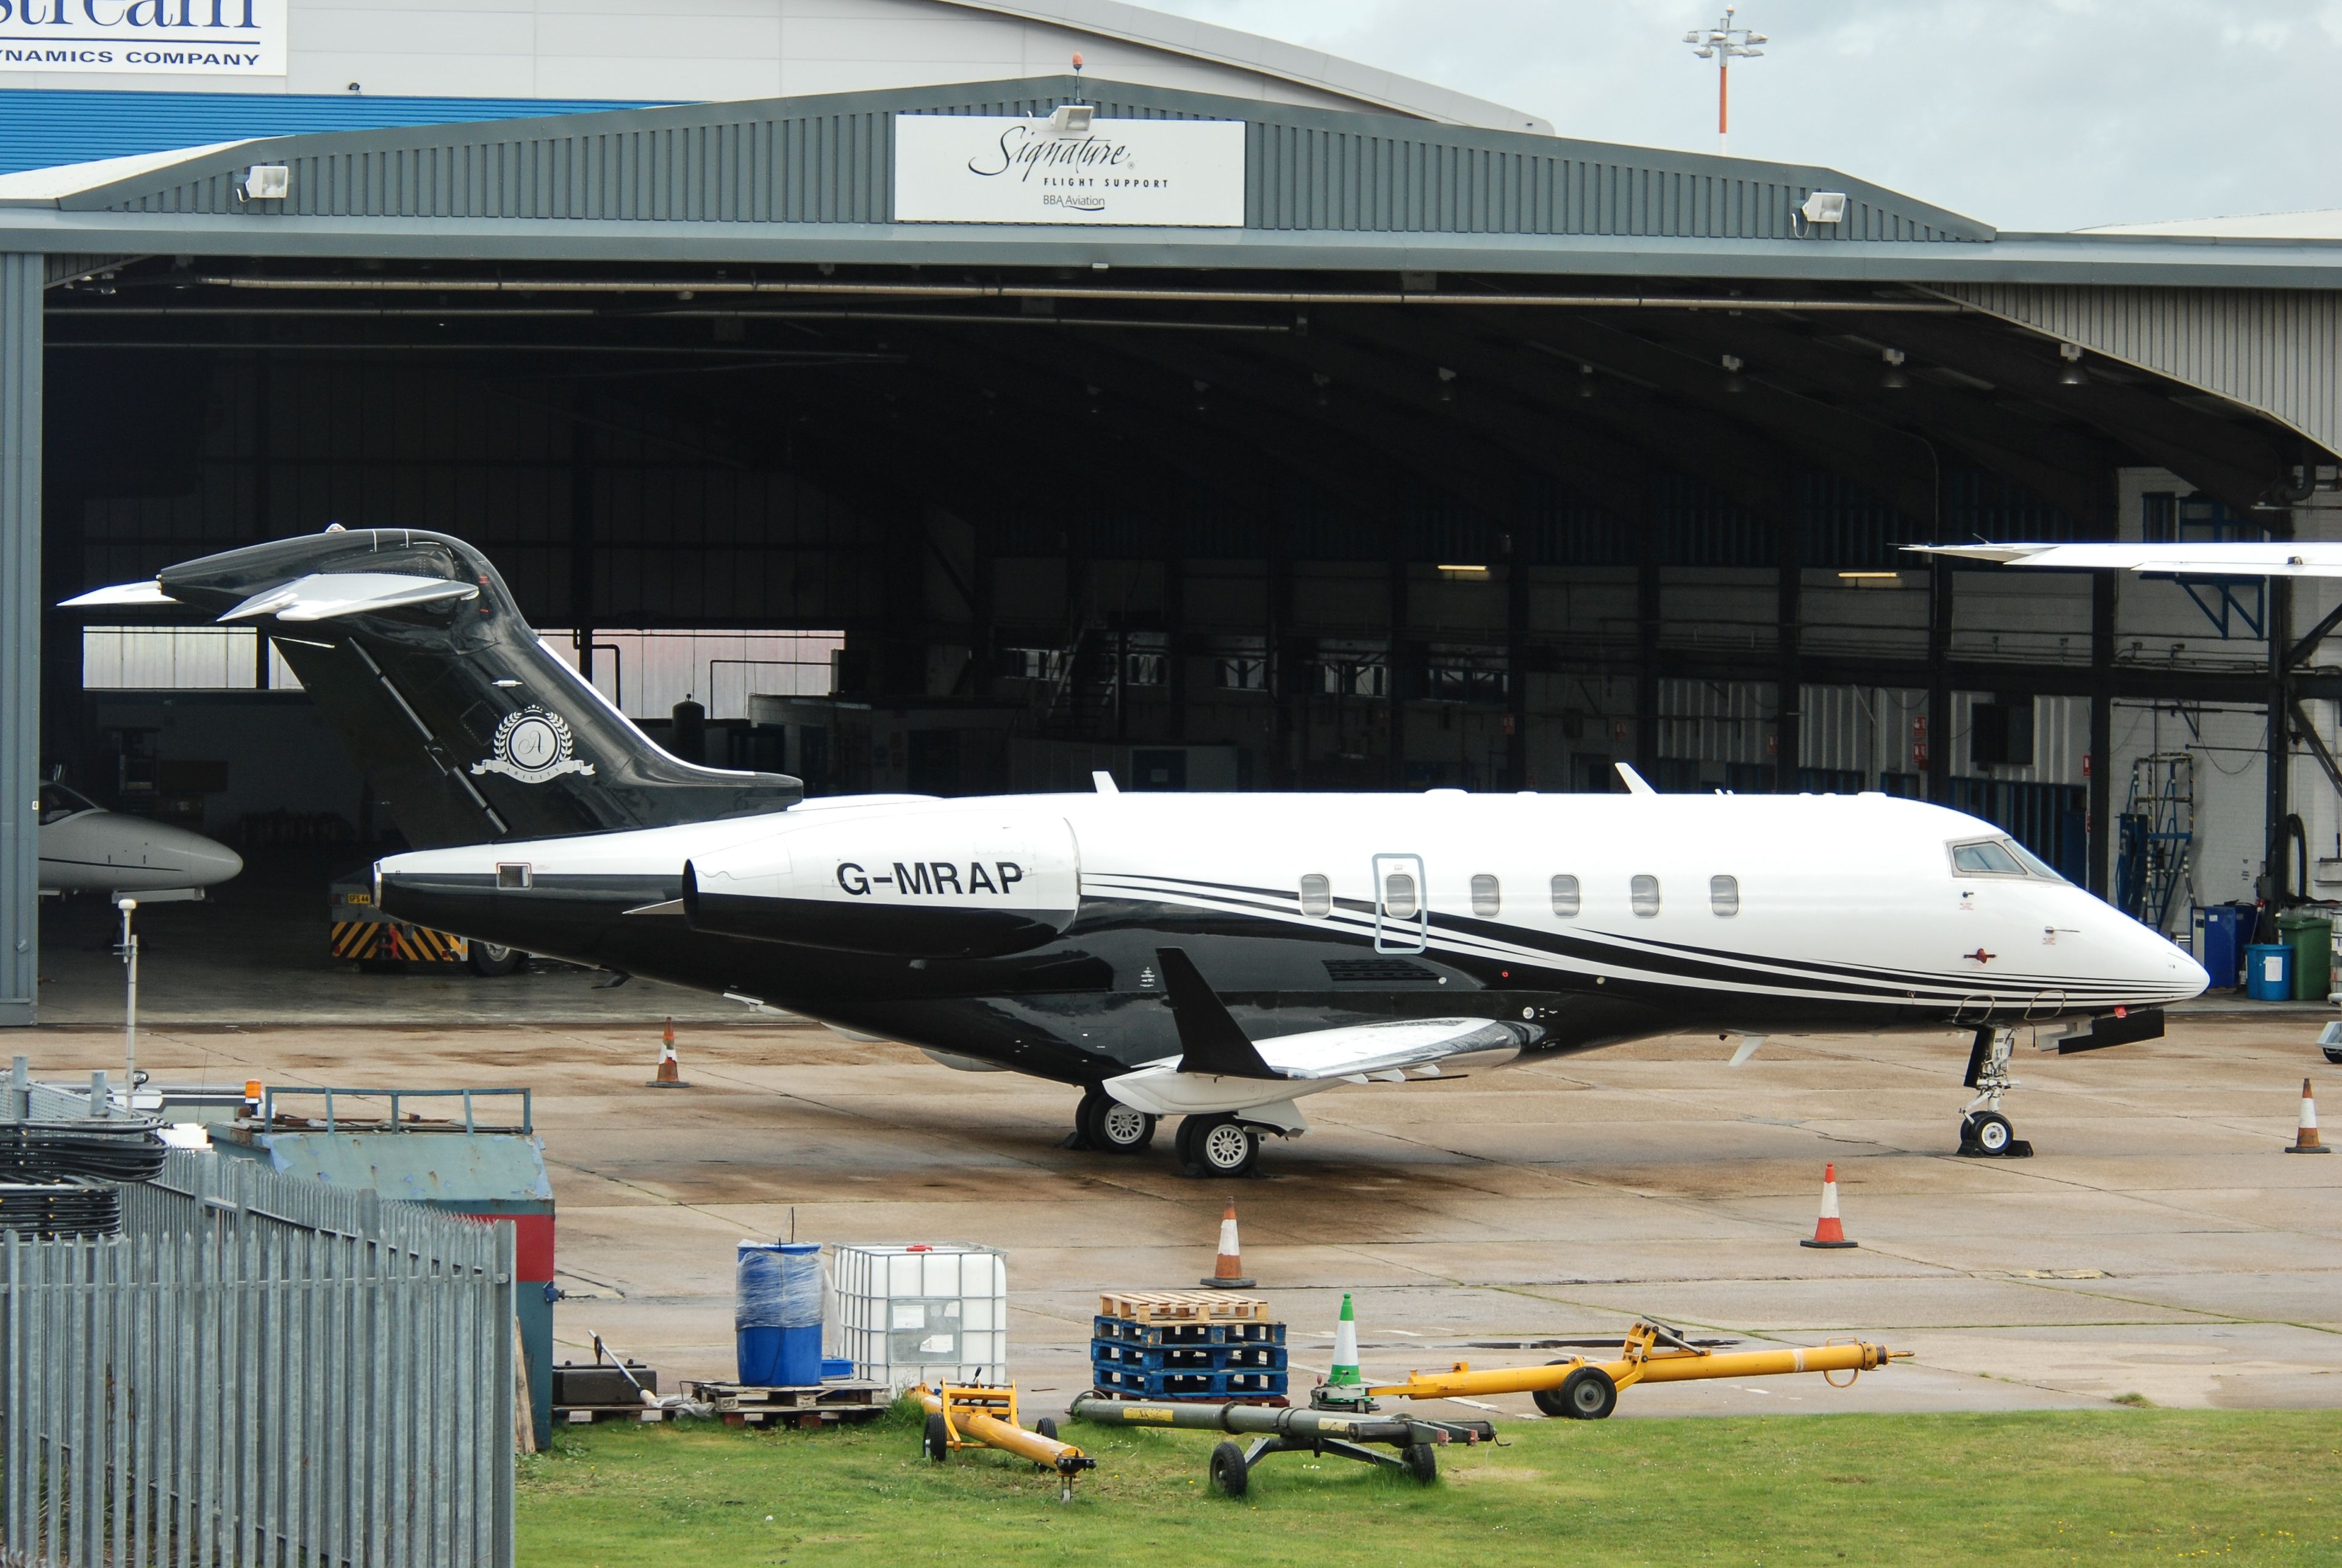 N575FD/N575FD Corporate Bombardier Challenger 300 Airframe Information - AVSpotters.com